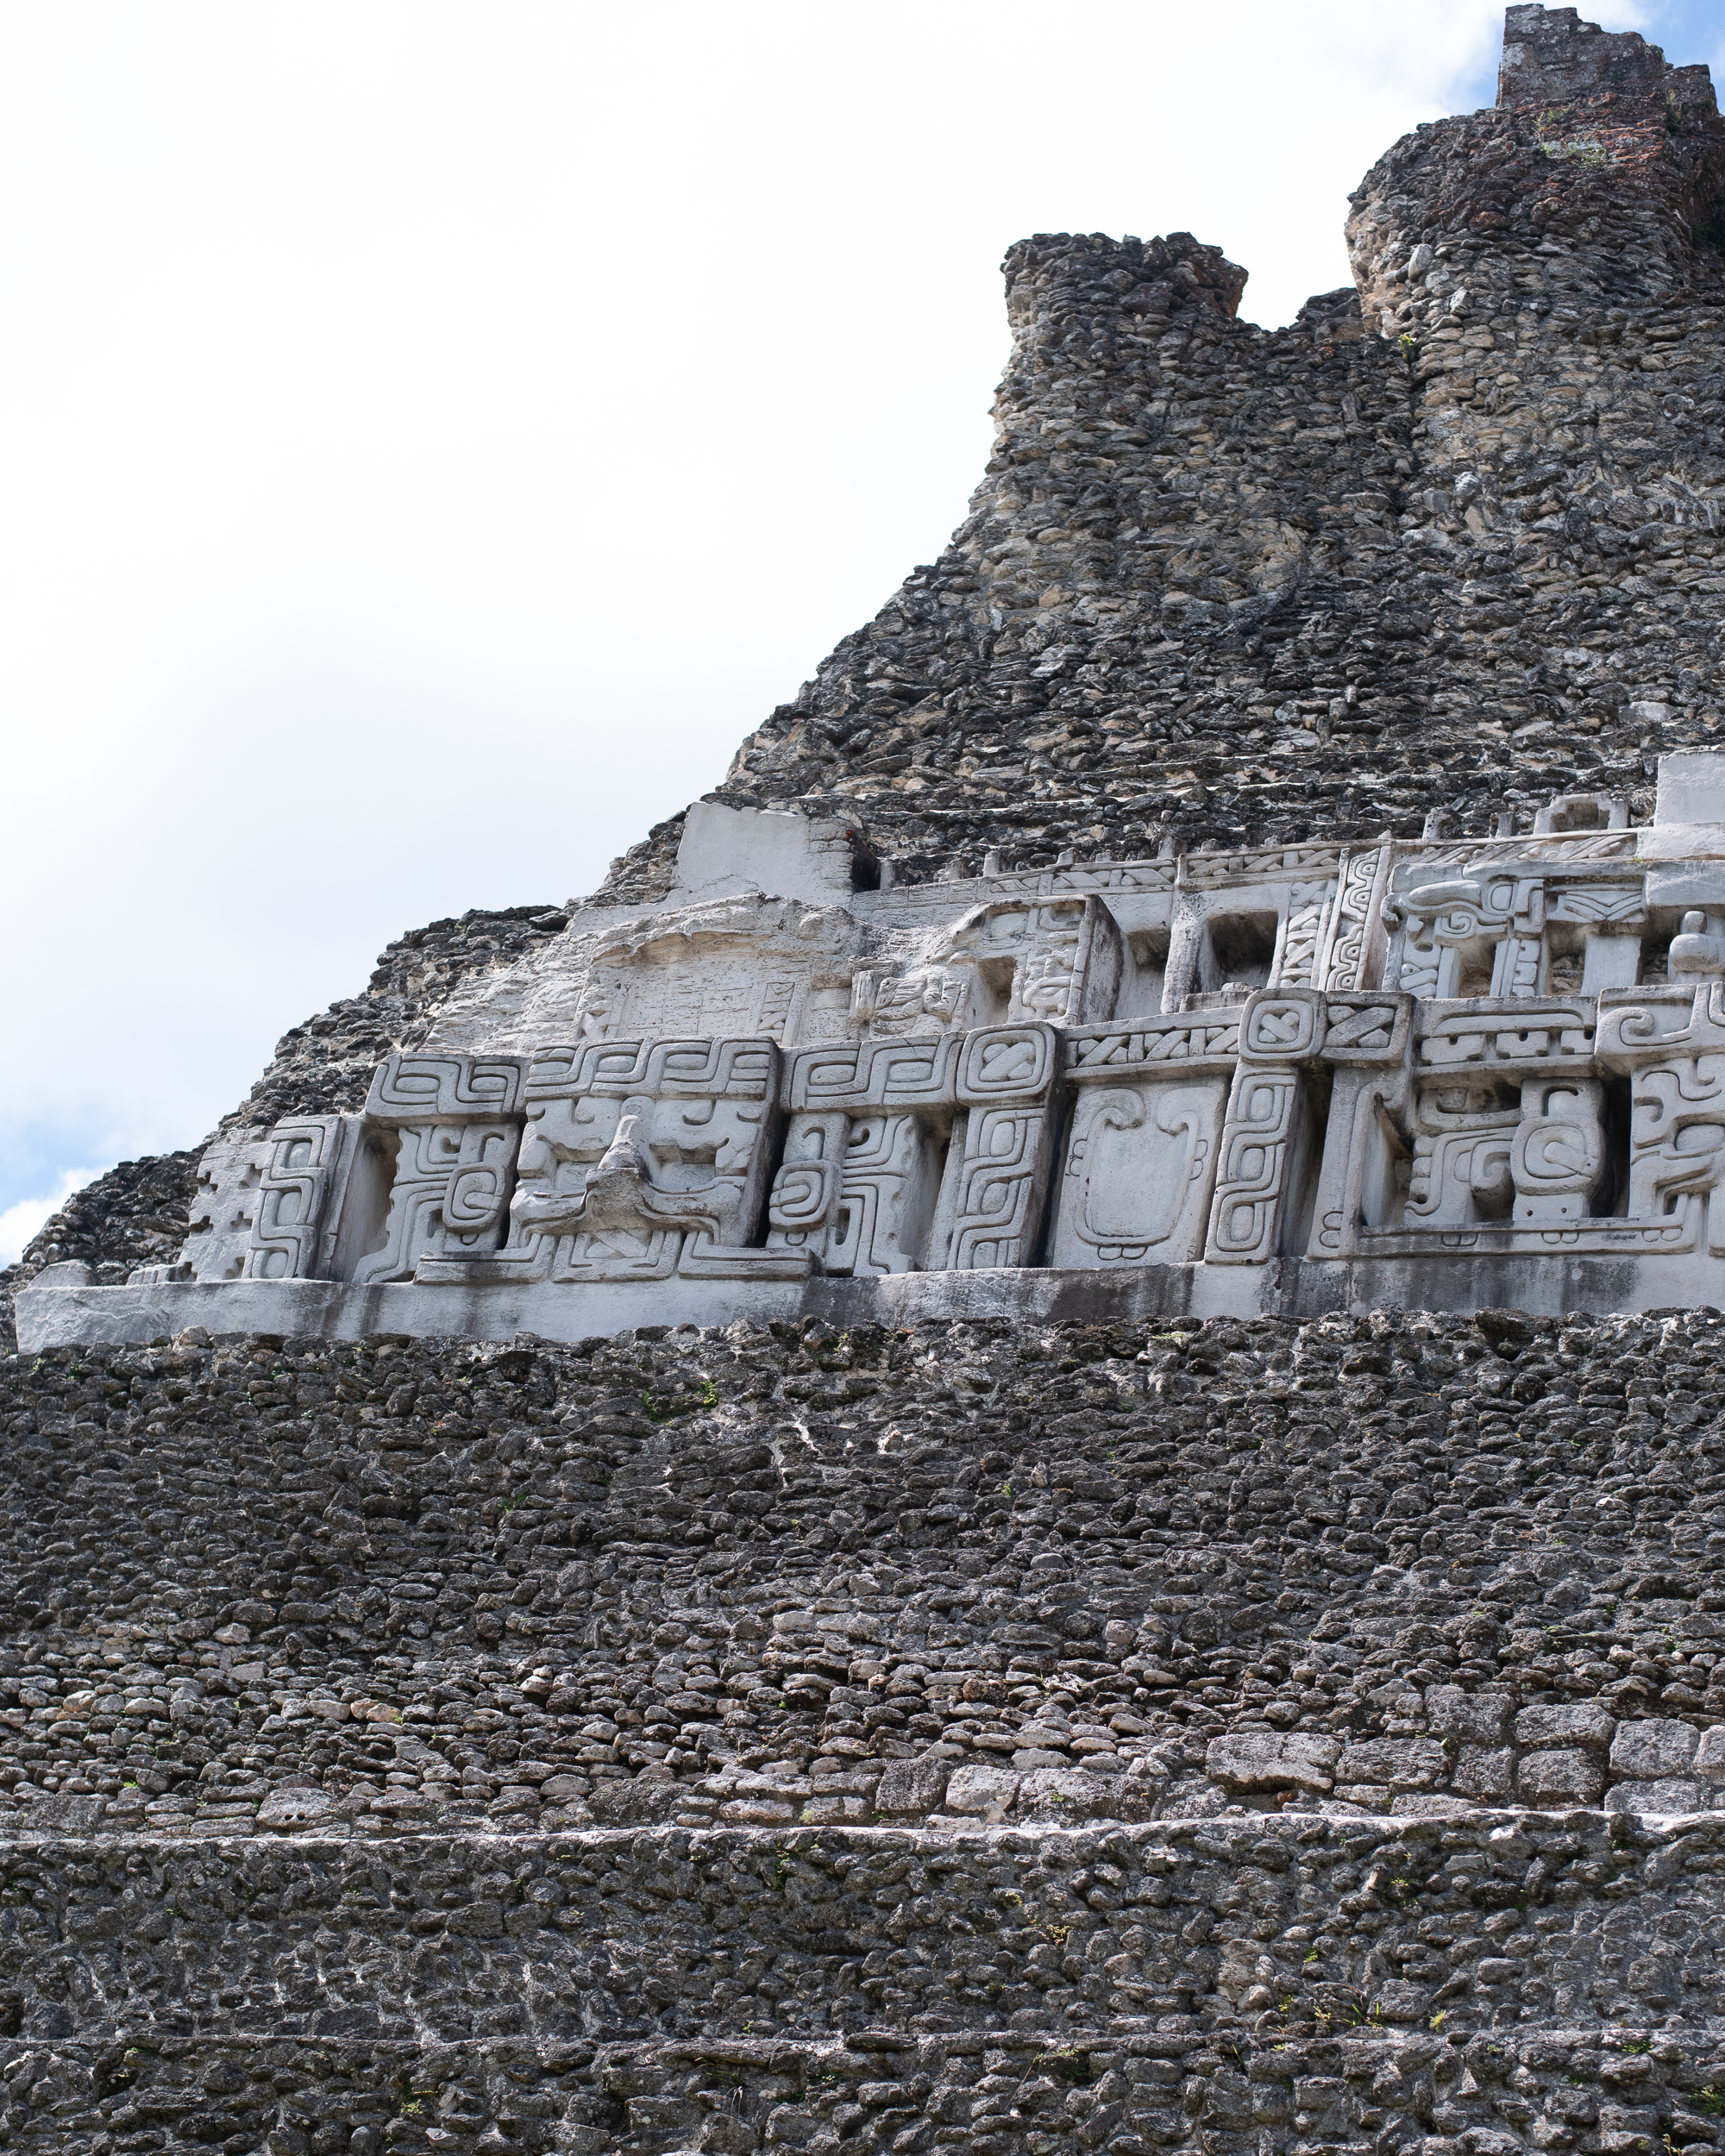 Xunantunich, Belize travel blog, Biggest Mayan ruins, Best mayan ruins in Belize, atlanta travel bloggers, best travel and style bloggers, best mayan ruins in Belize, things to do in belize, Best places to visit in Belize, did the mayans have ancient alien technology